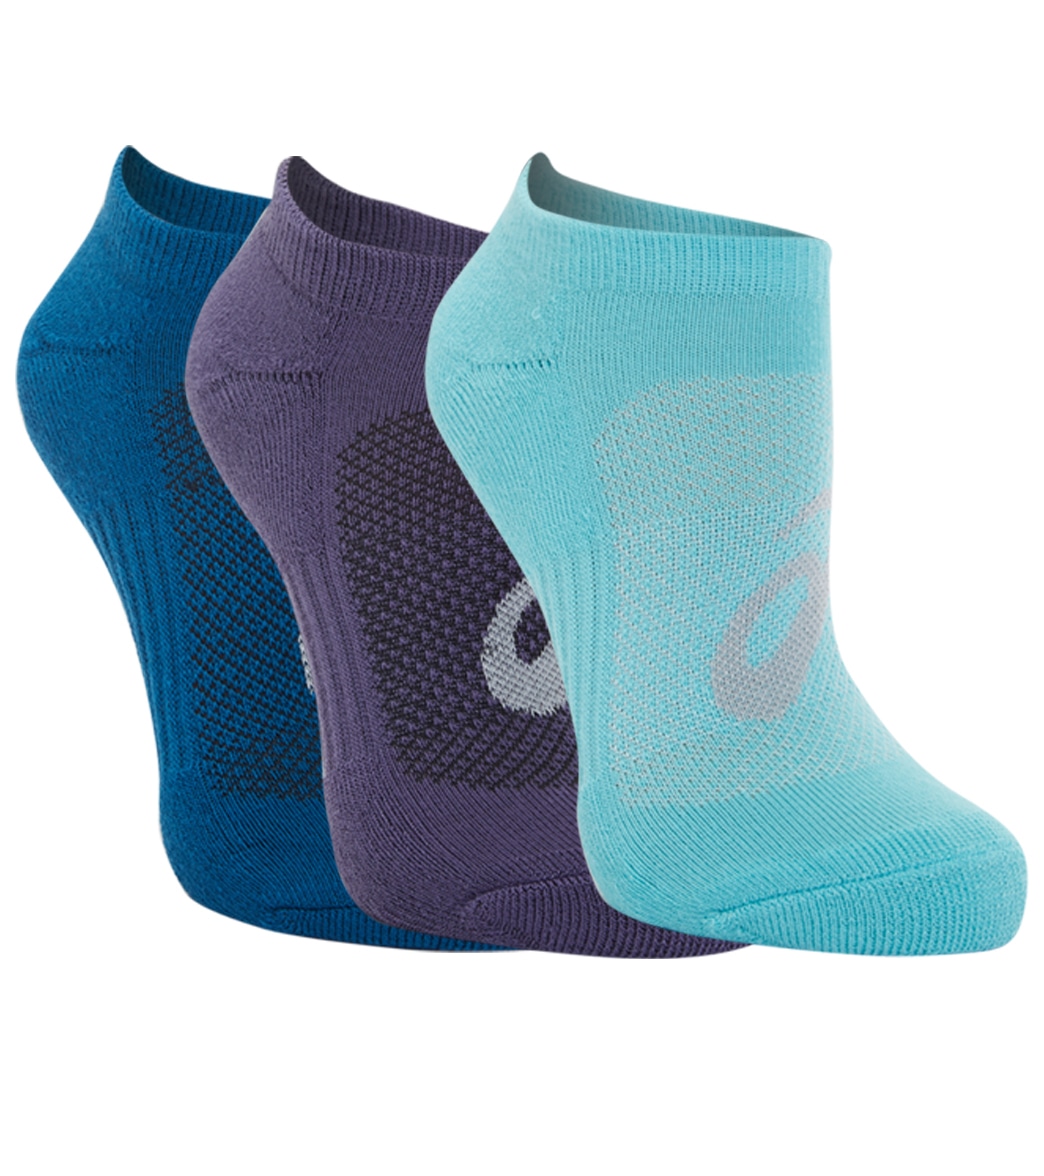 Asics Women's Invasion No Show Socks 6 Pack - Dusty Purple/Ice Mint Small Size Small - Swimoutlet.com